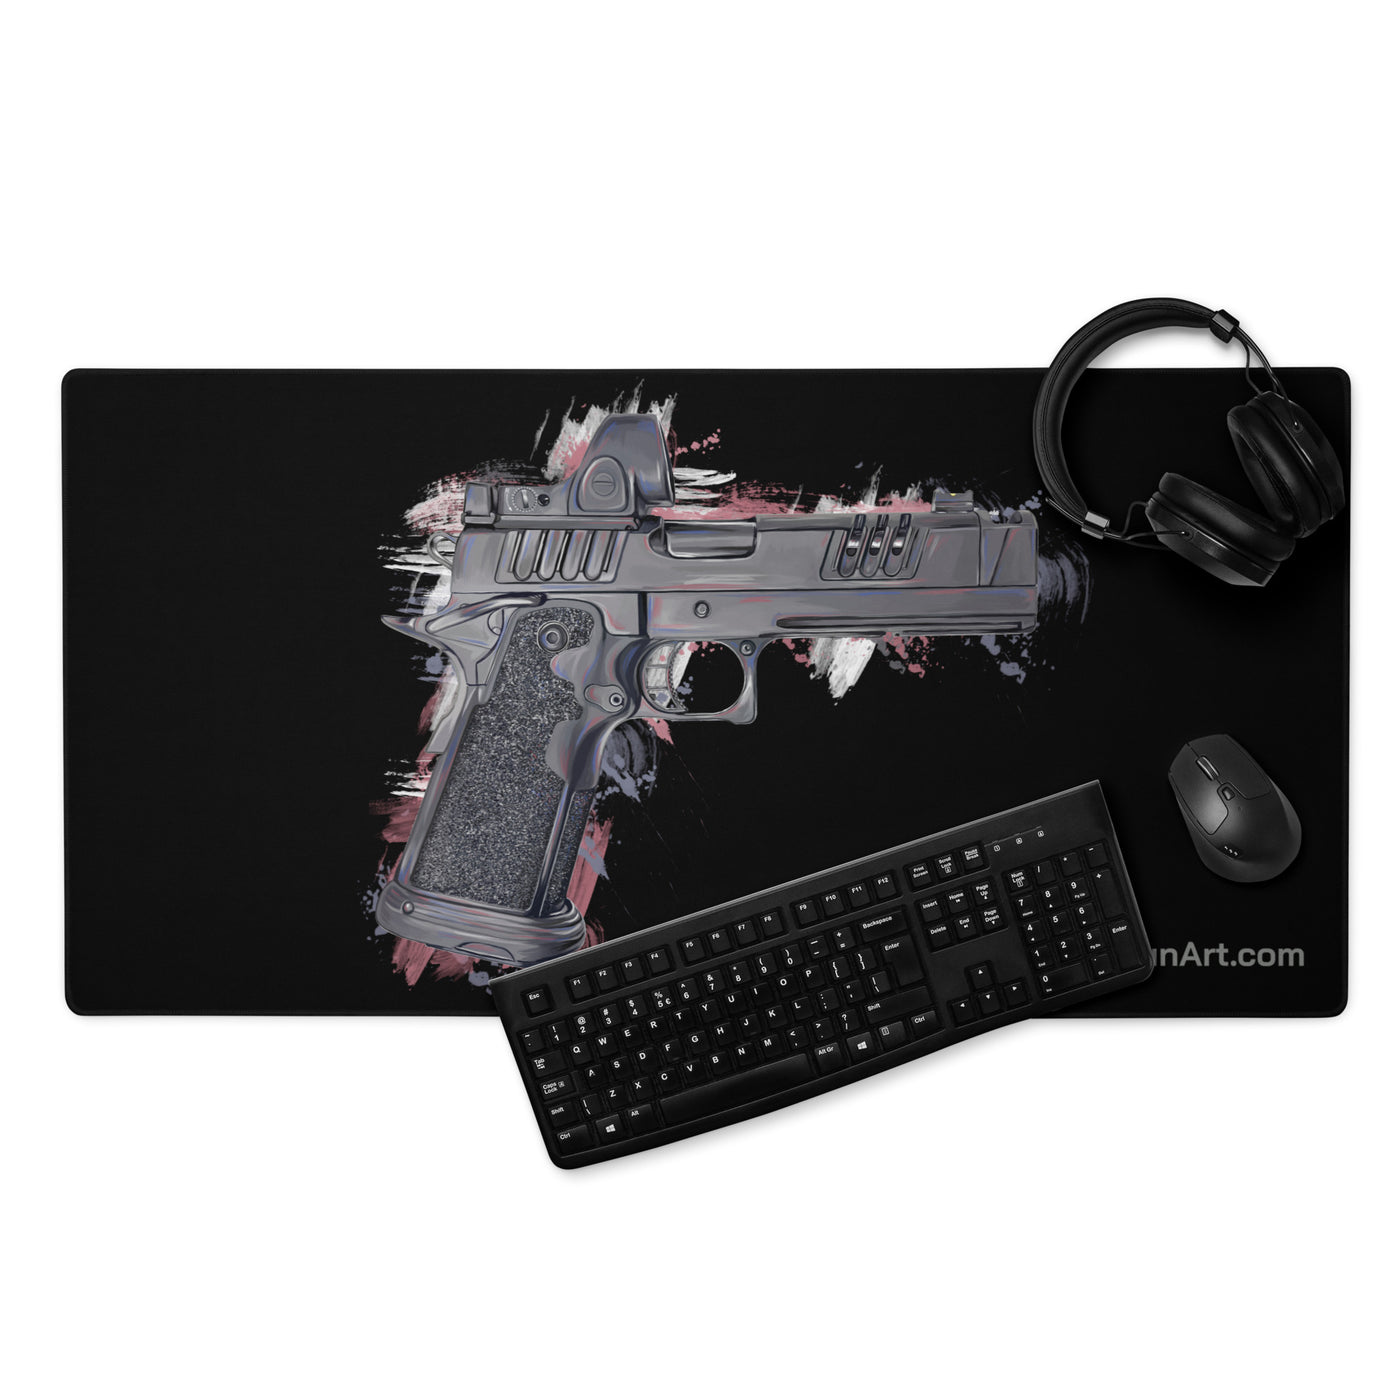 2011 Delta Pistol Gaming Mouse Pad - Black Background